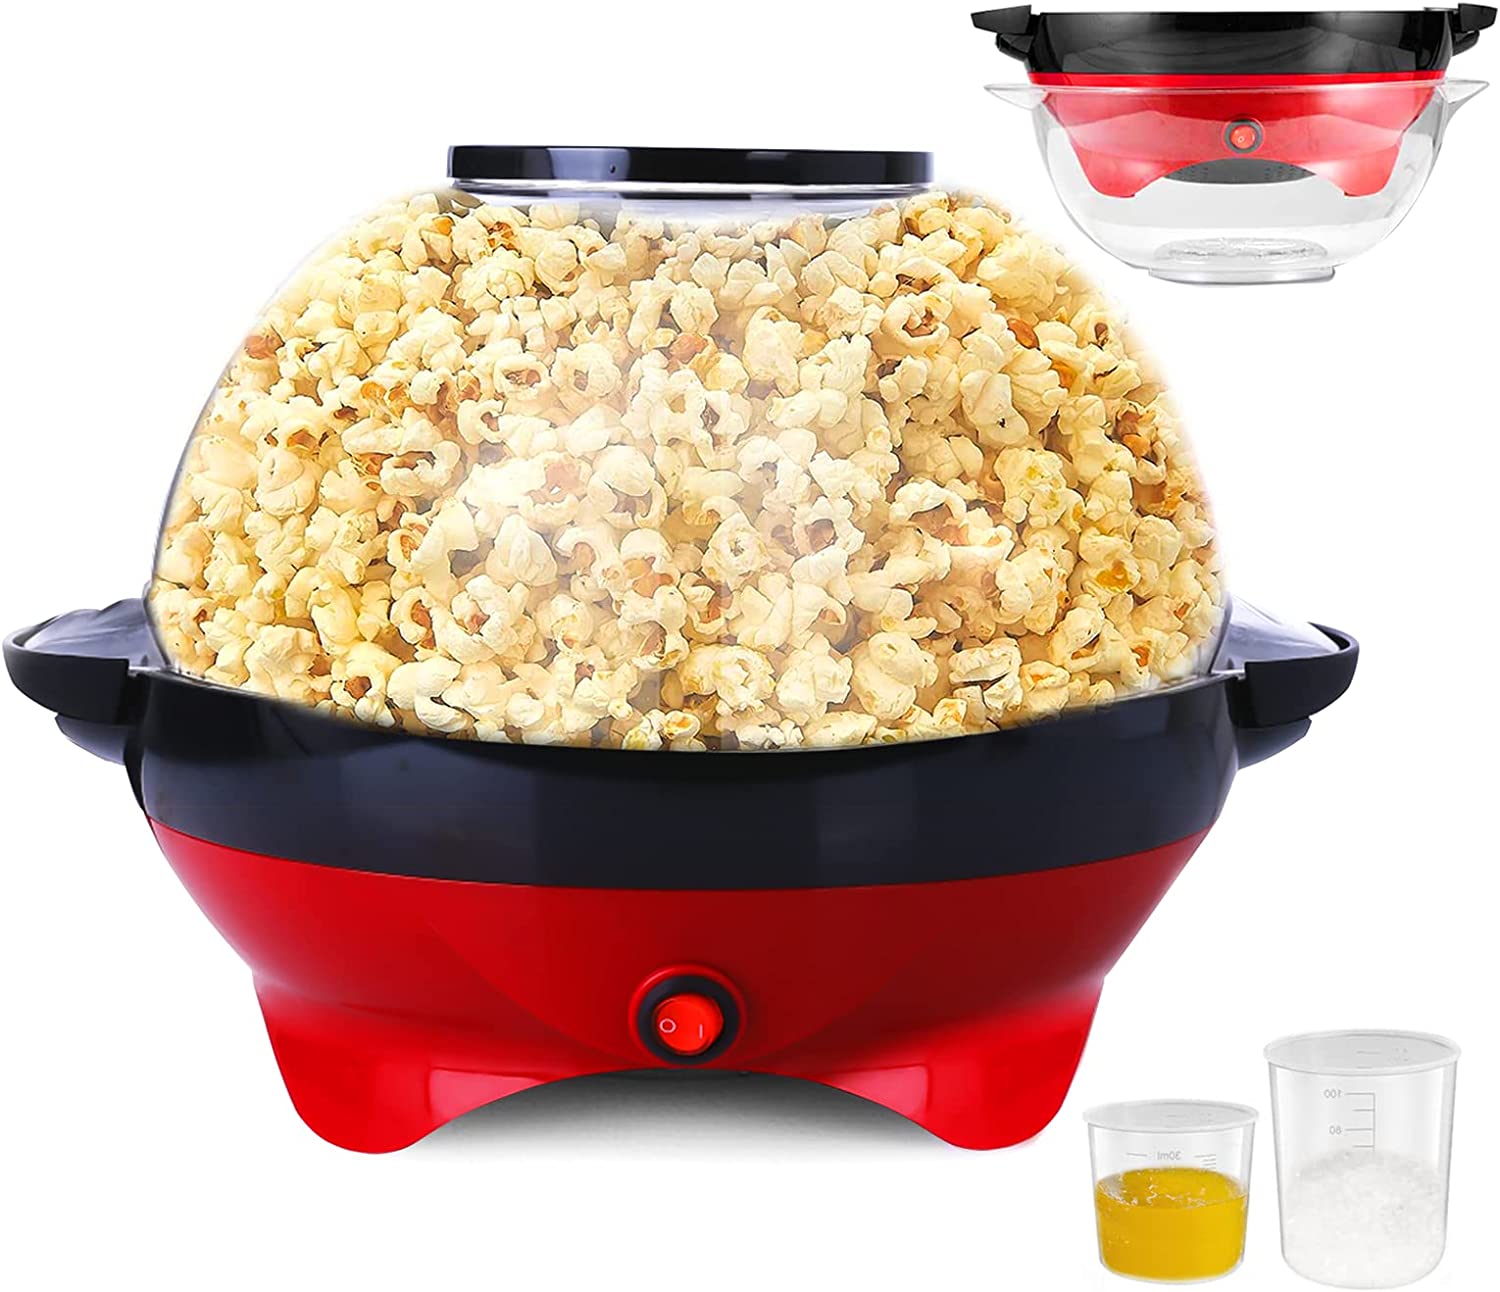 TLGREEN Popcorn Machine 5 L, Popcorn Machine with Sugar & Oil, 800 W Popcorn Maker for Home with Two Measuring Cups (30 ml, 100 ml) & Non-Stick Coating & Removable Heating Surface - Large Lid as Serving Bowl